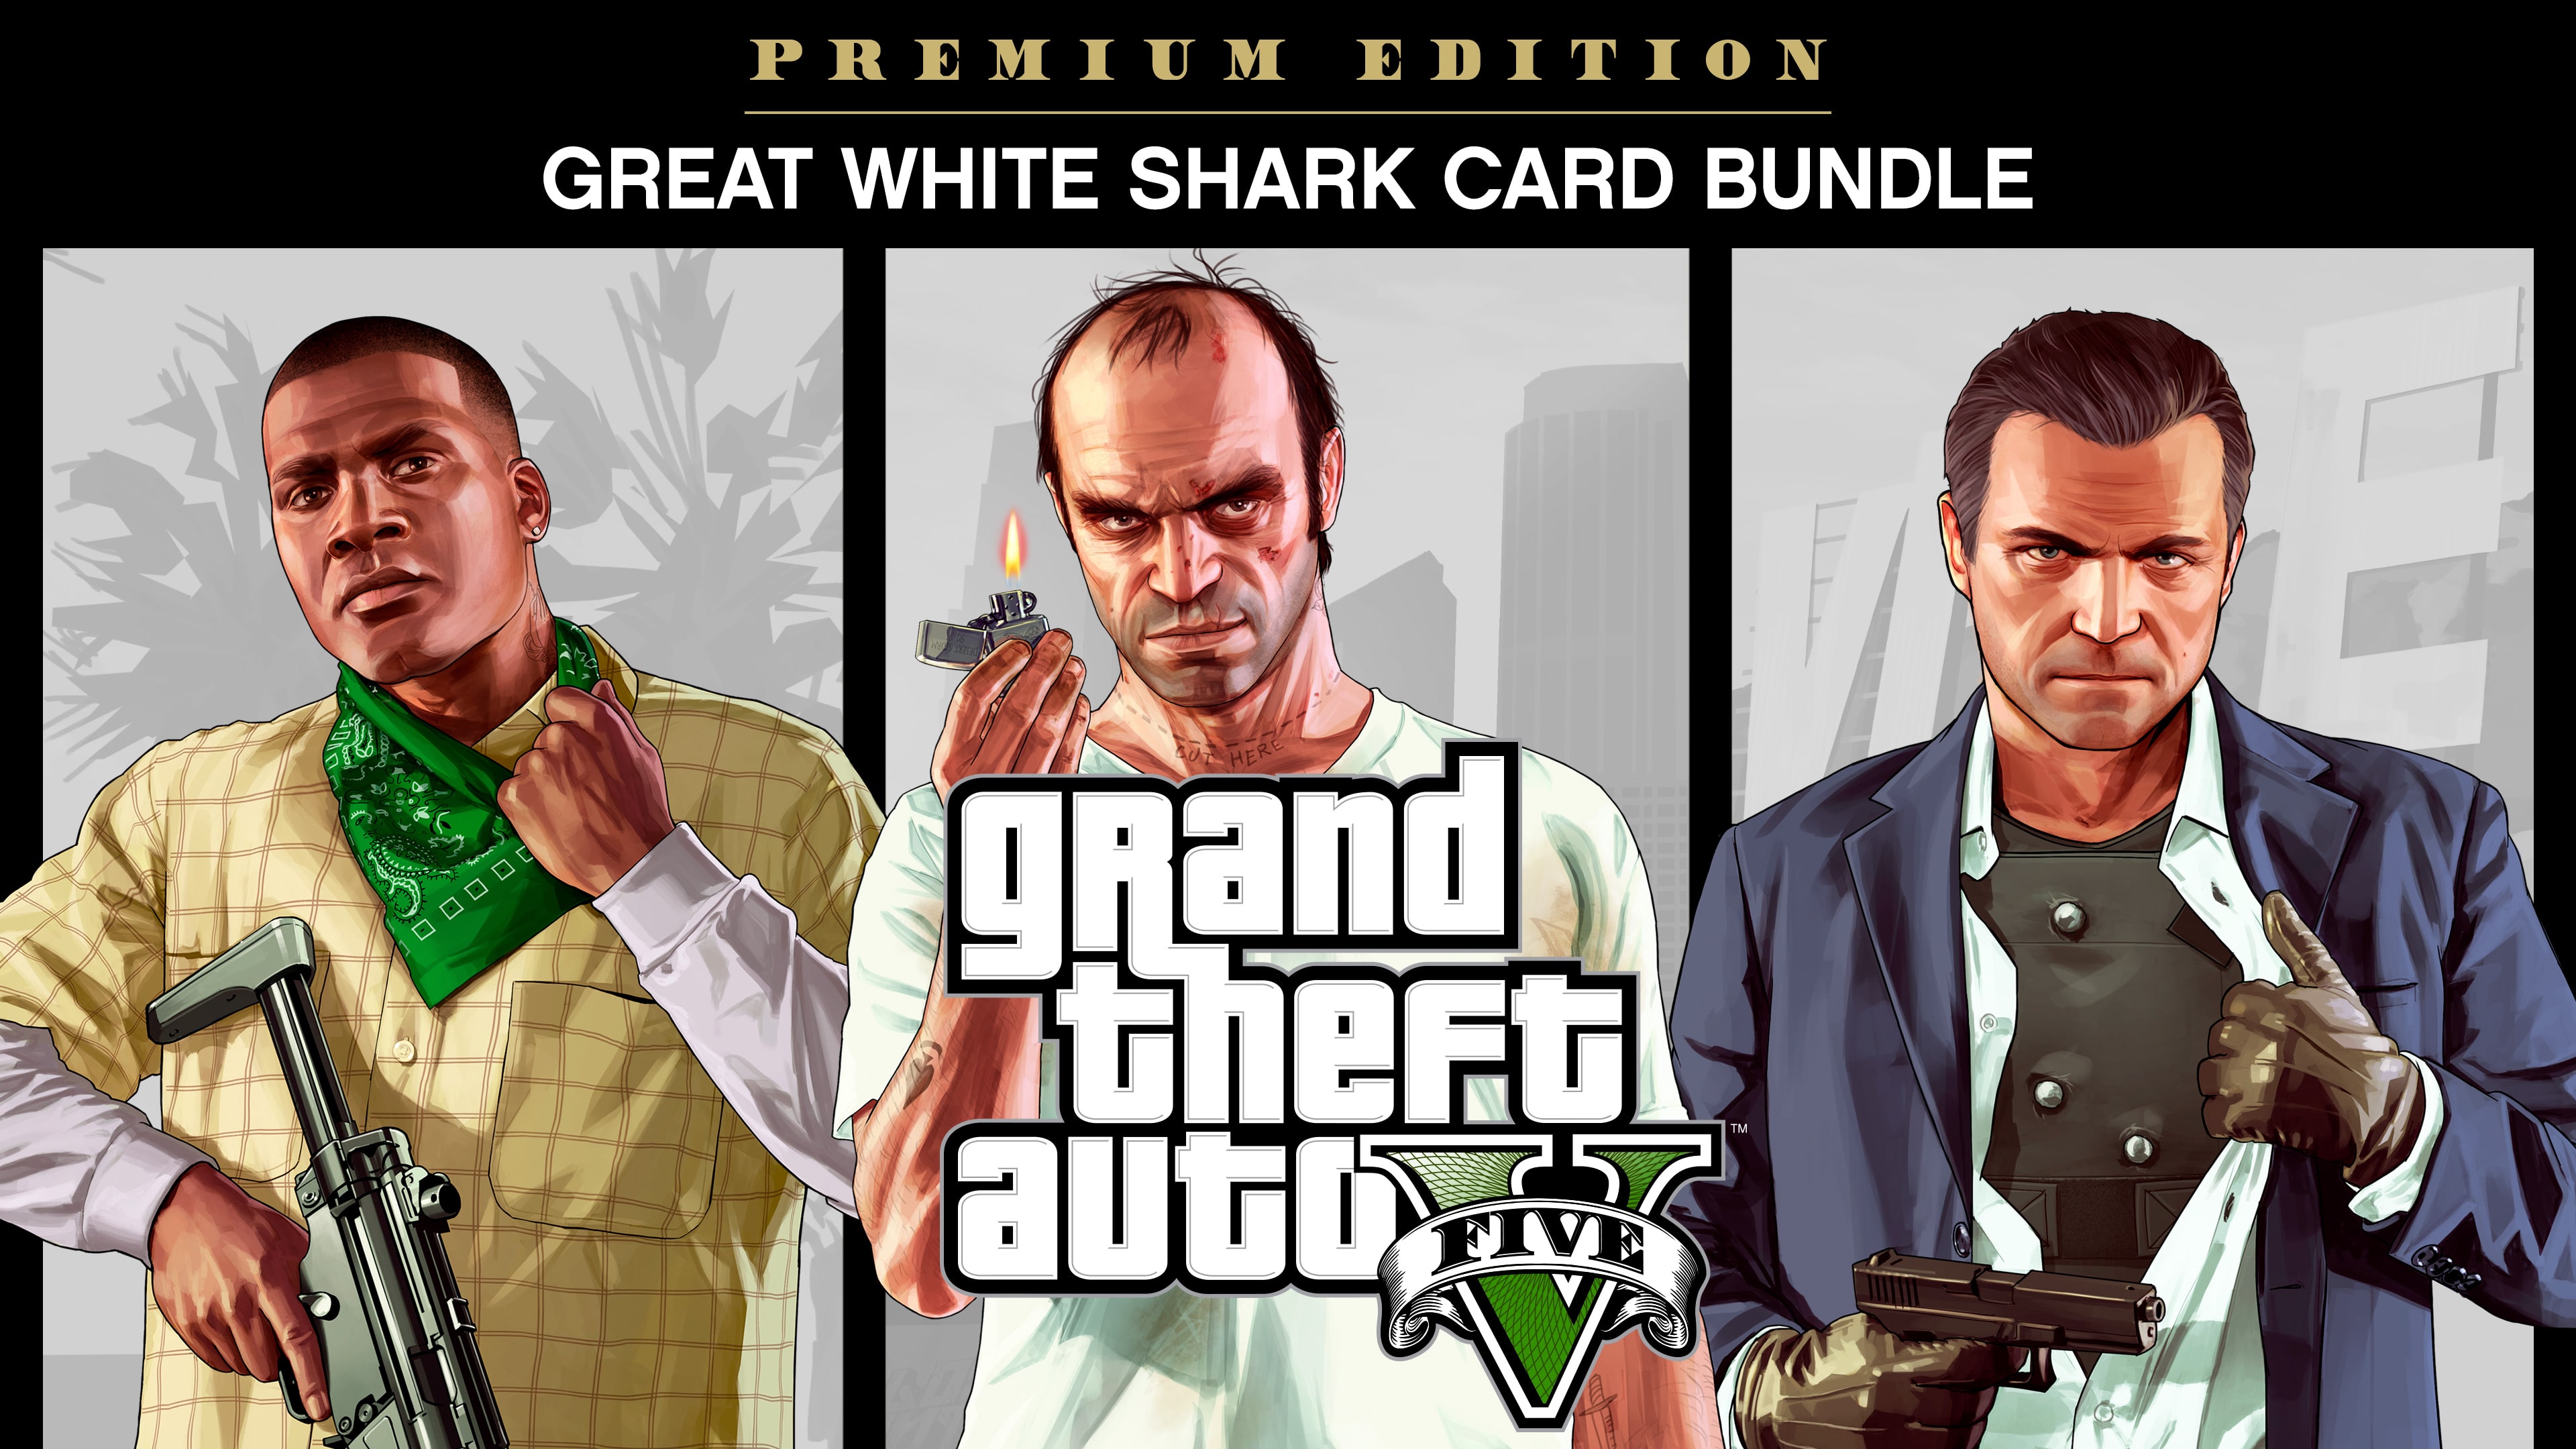 Grand Theft Auto V: Premium Edition & Great White Shark Card Bundle (English, Korean, Traditional Chinese)